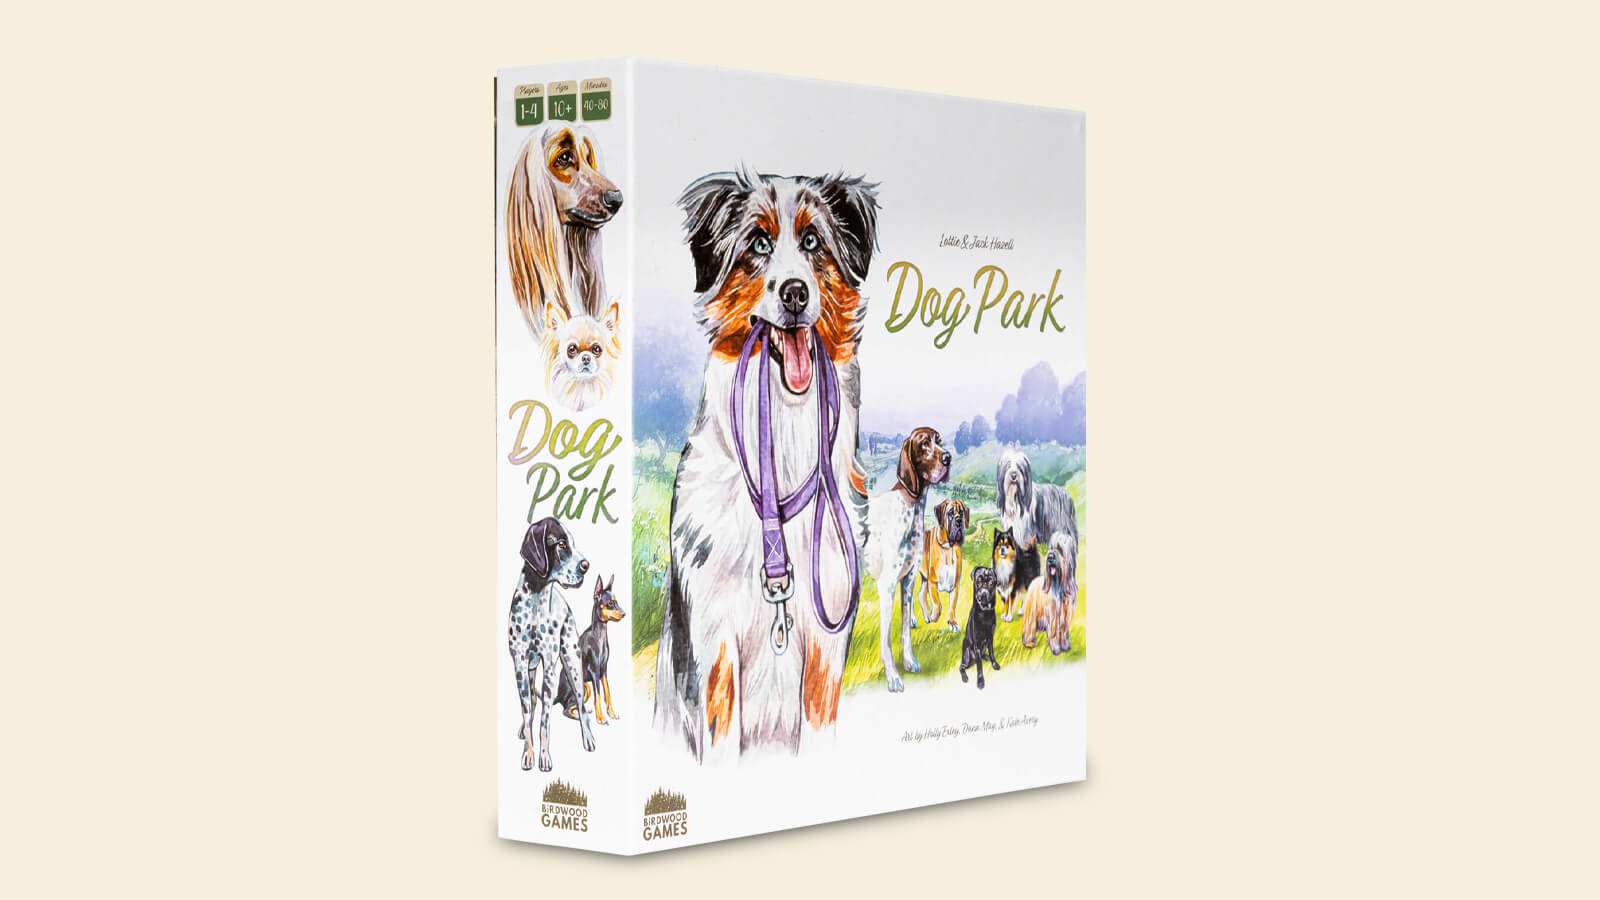 Revealing the Cover of Dog Park